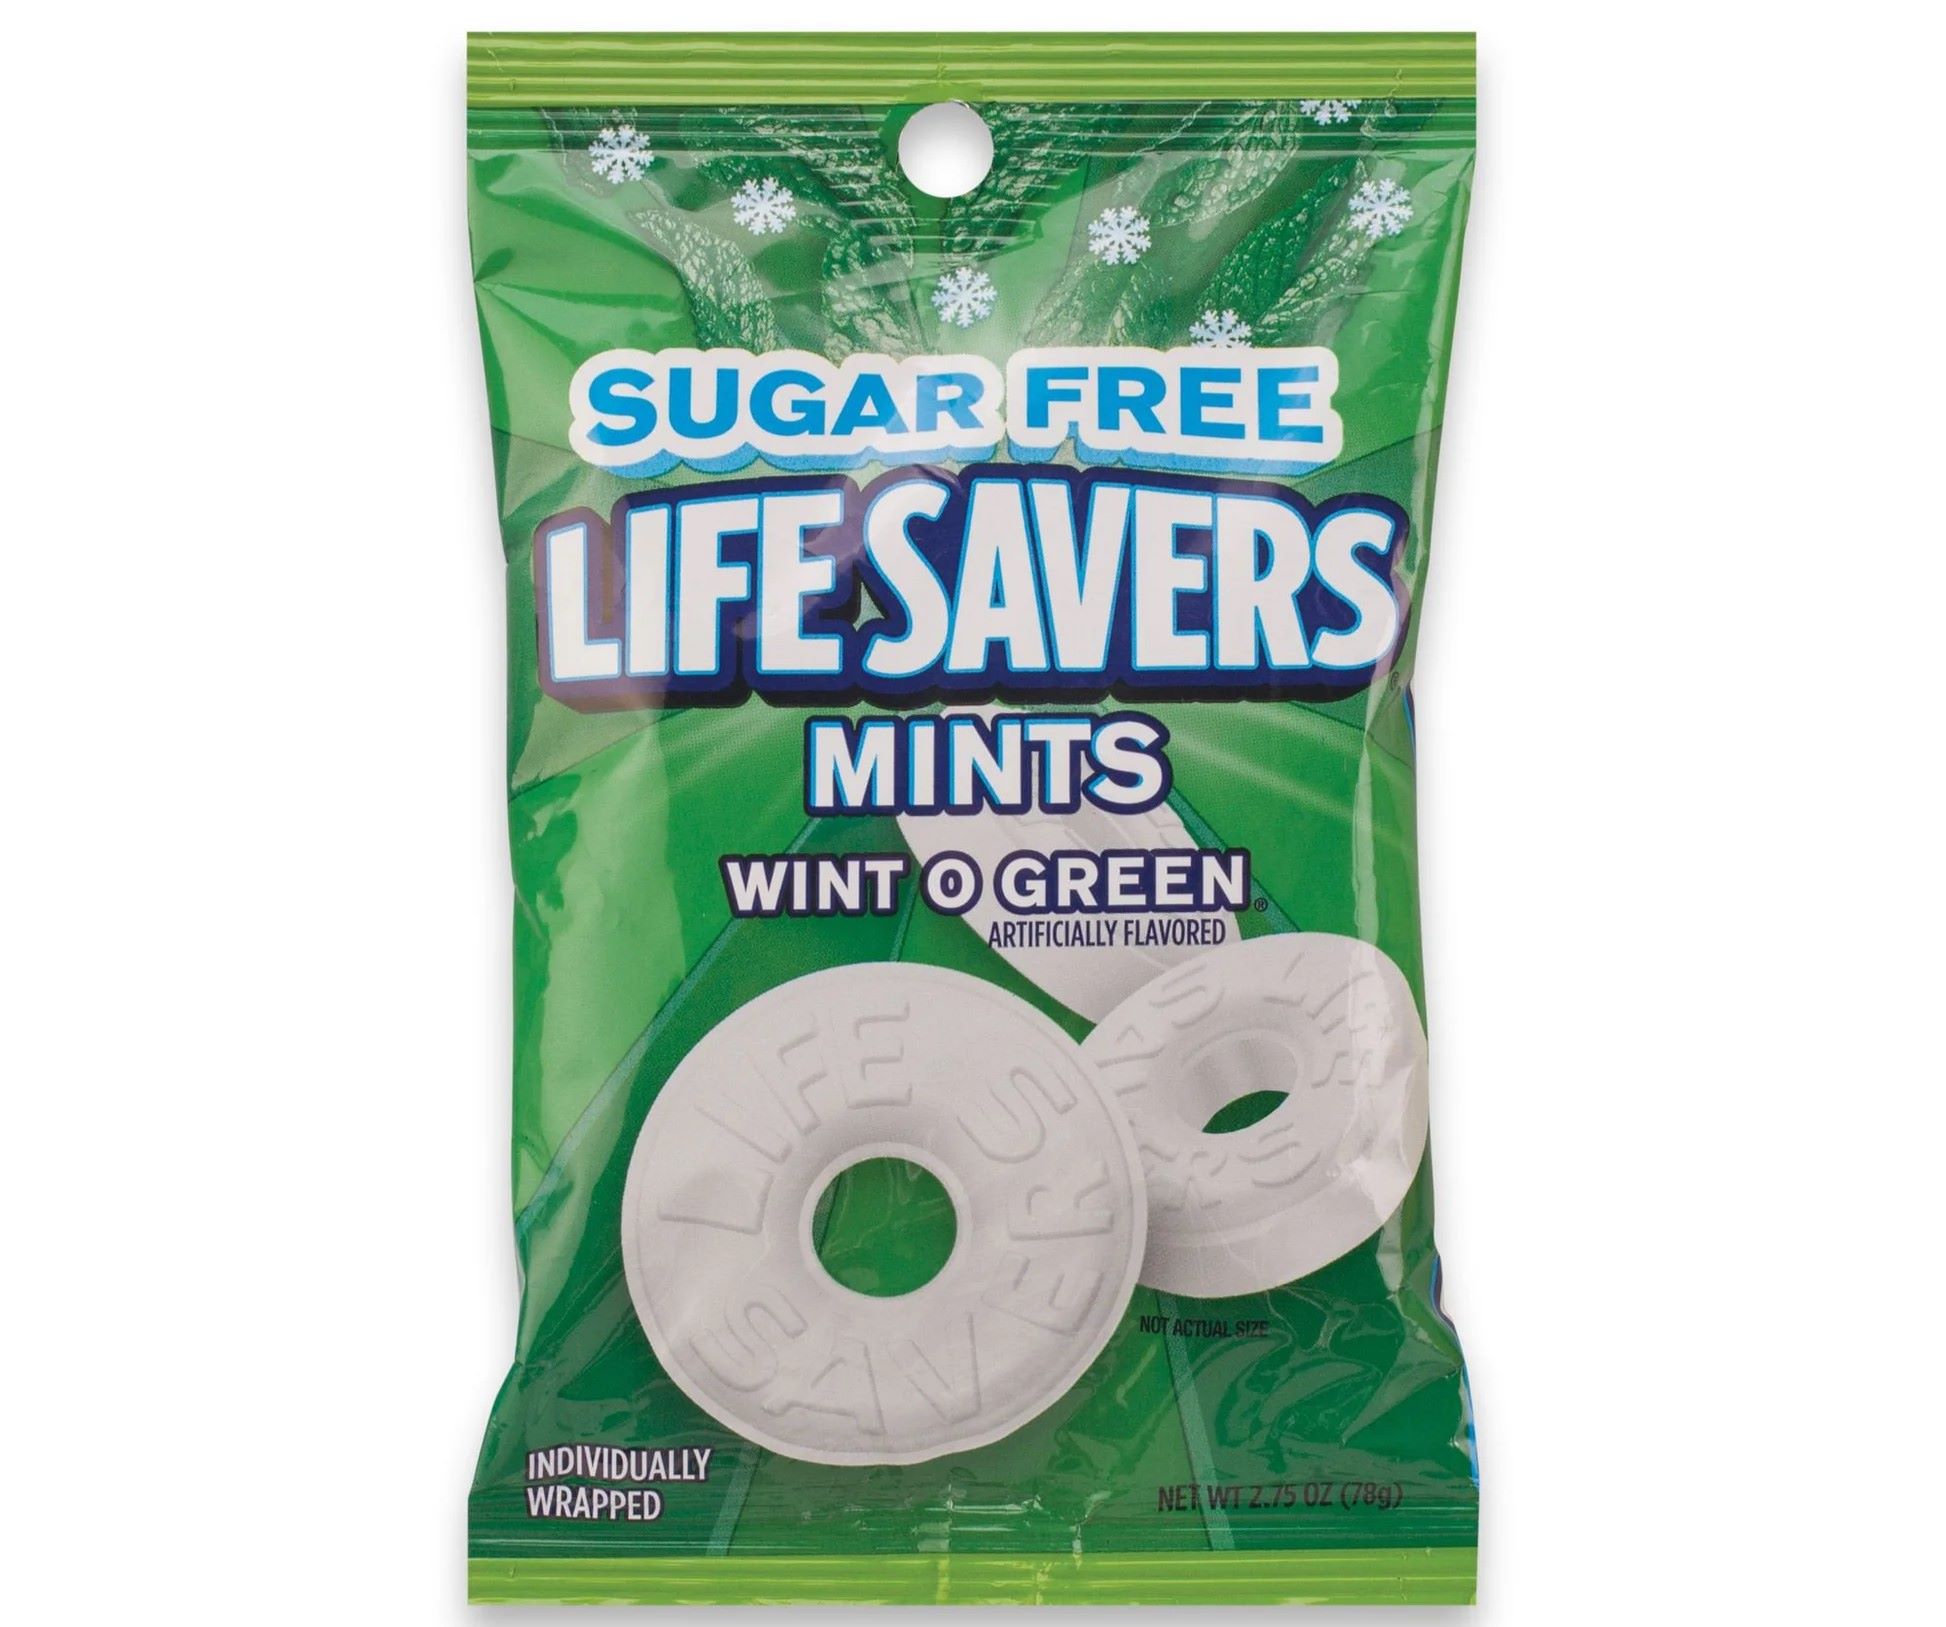 19-life-savers-mints-nutrition-facts